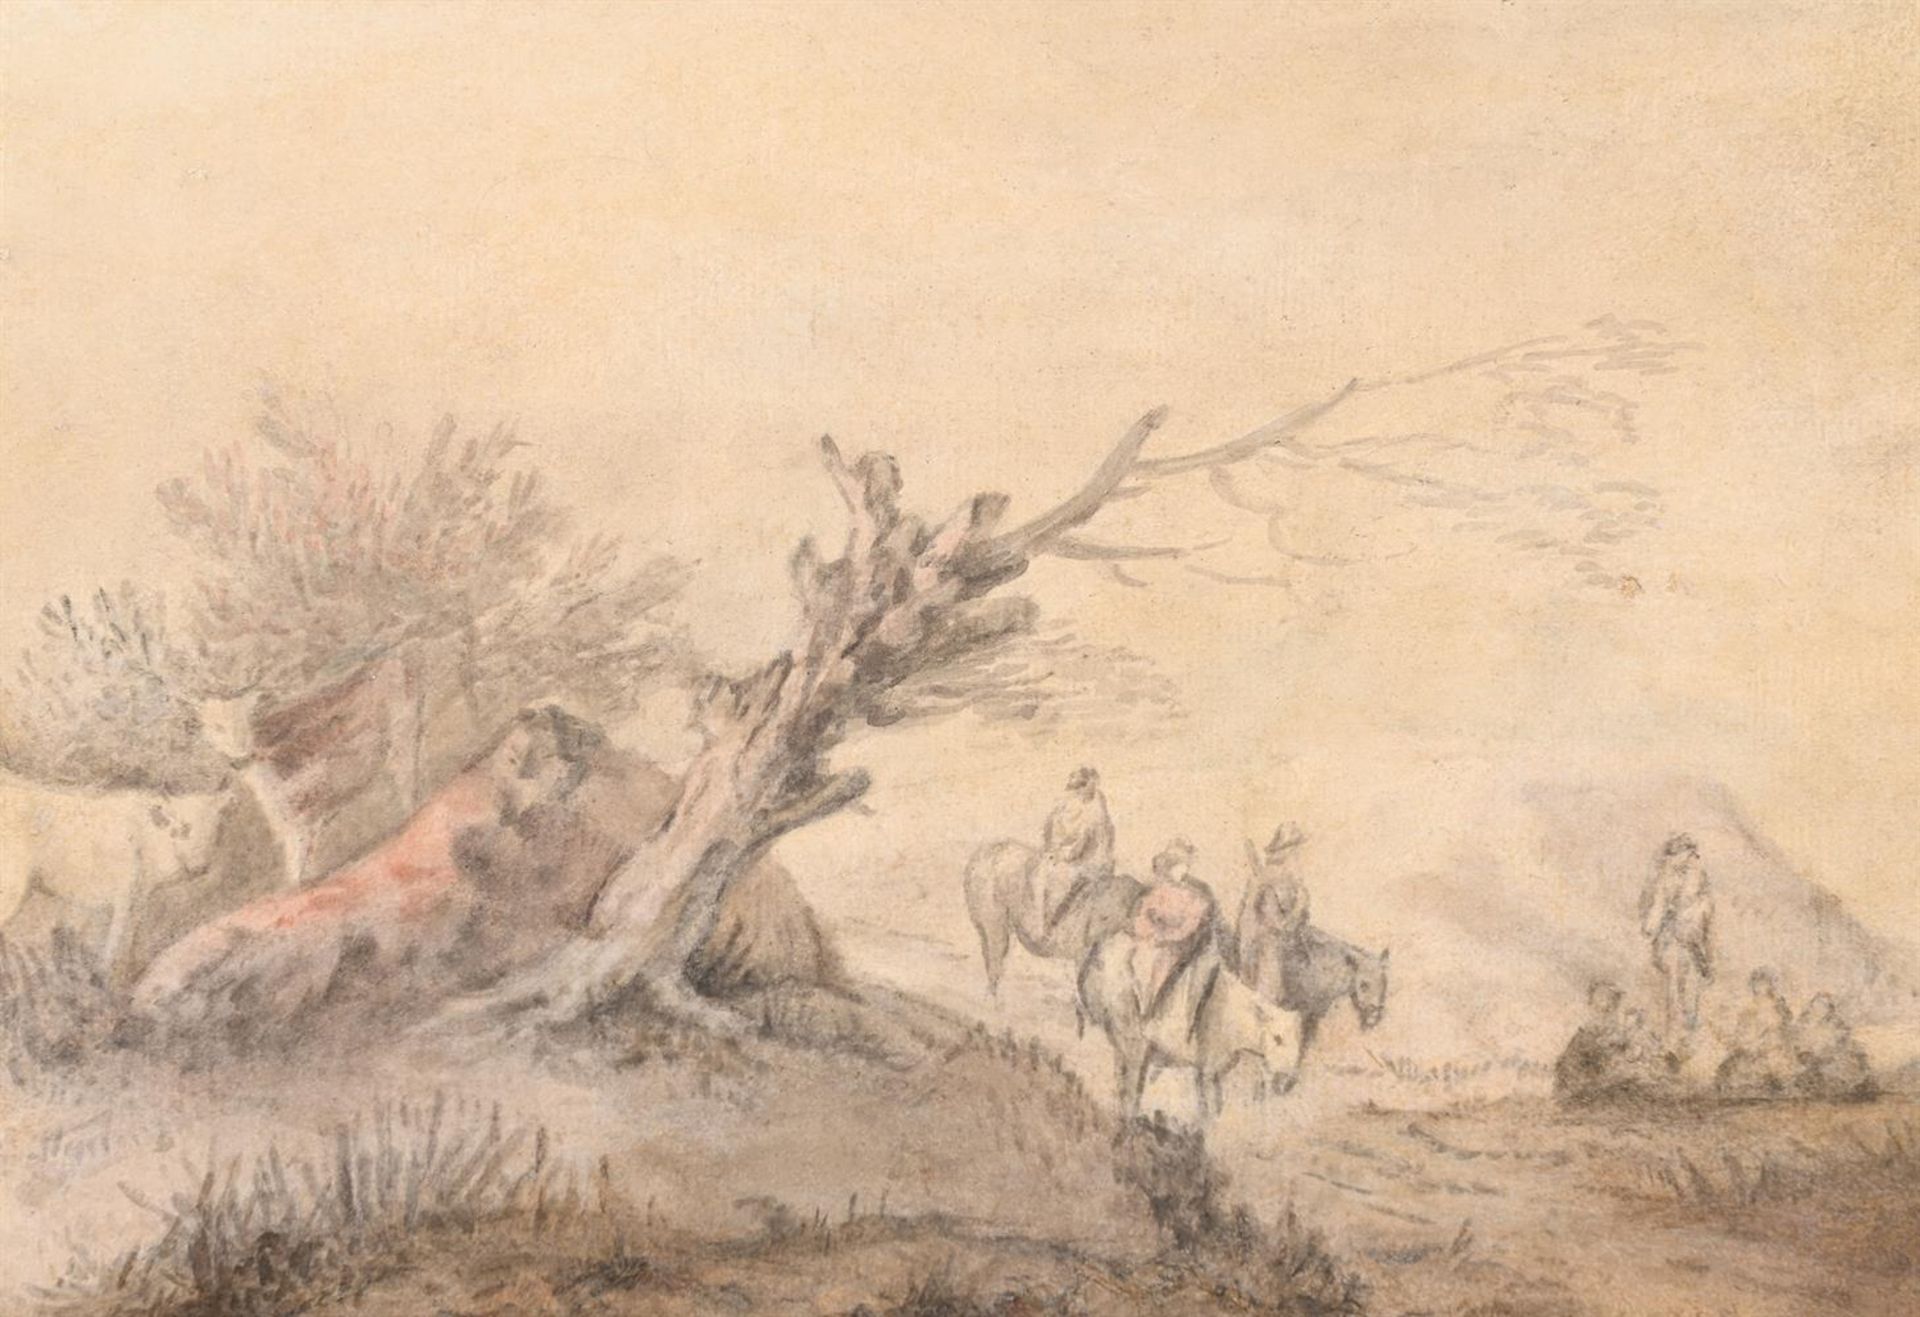 THOMAS GAINSBOROUGH (BRITISH 1727-1788), TRAVELLERS AND CATTLE IN A LANDSCAPE